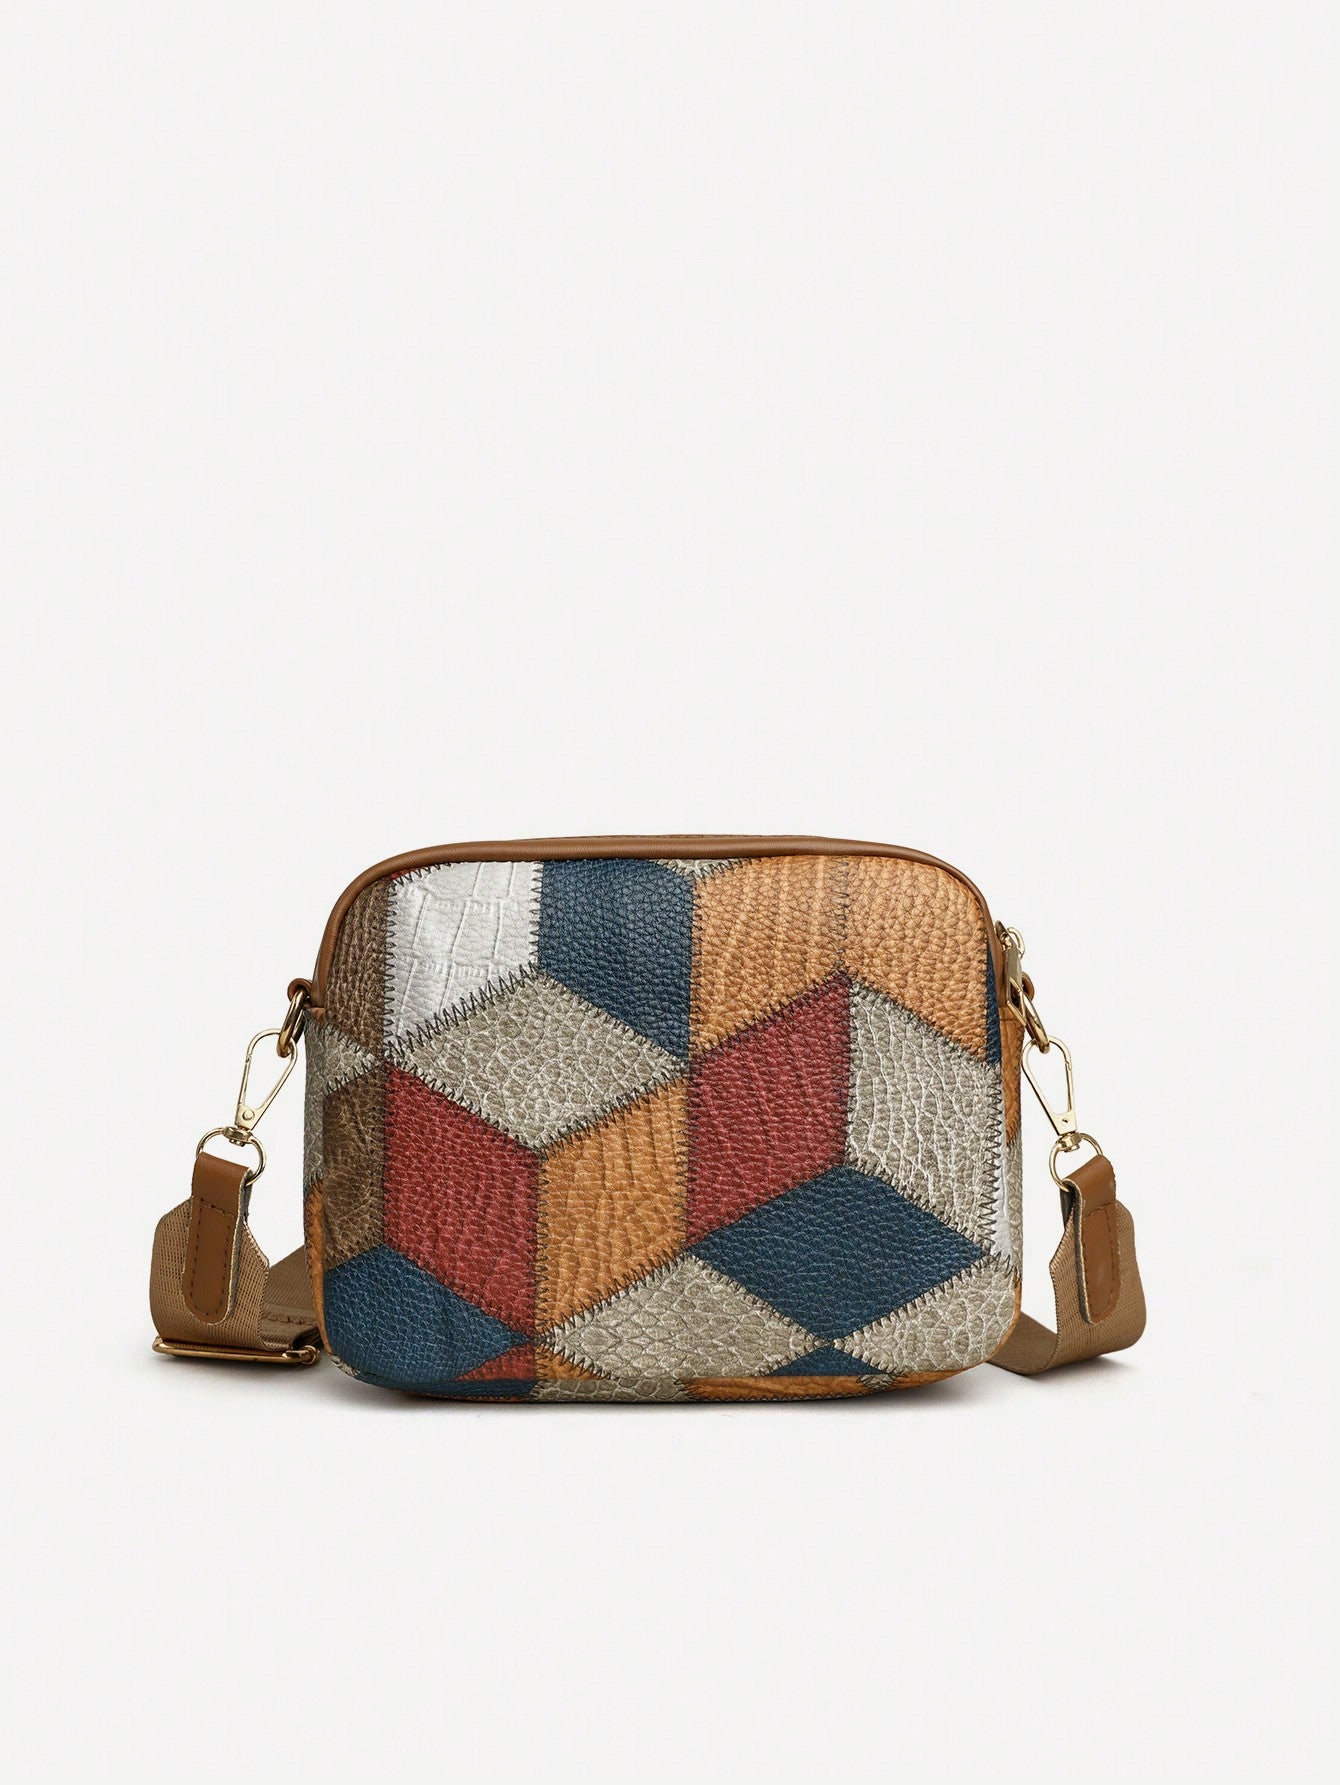 Geometric Pattern & Colorblock Design Decorated Crossbody Bag With Hardware Details And Small Purse - Negative Apparel